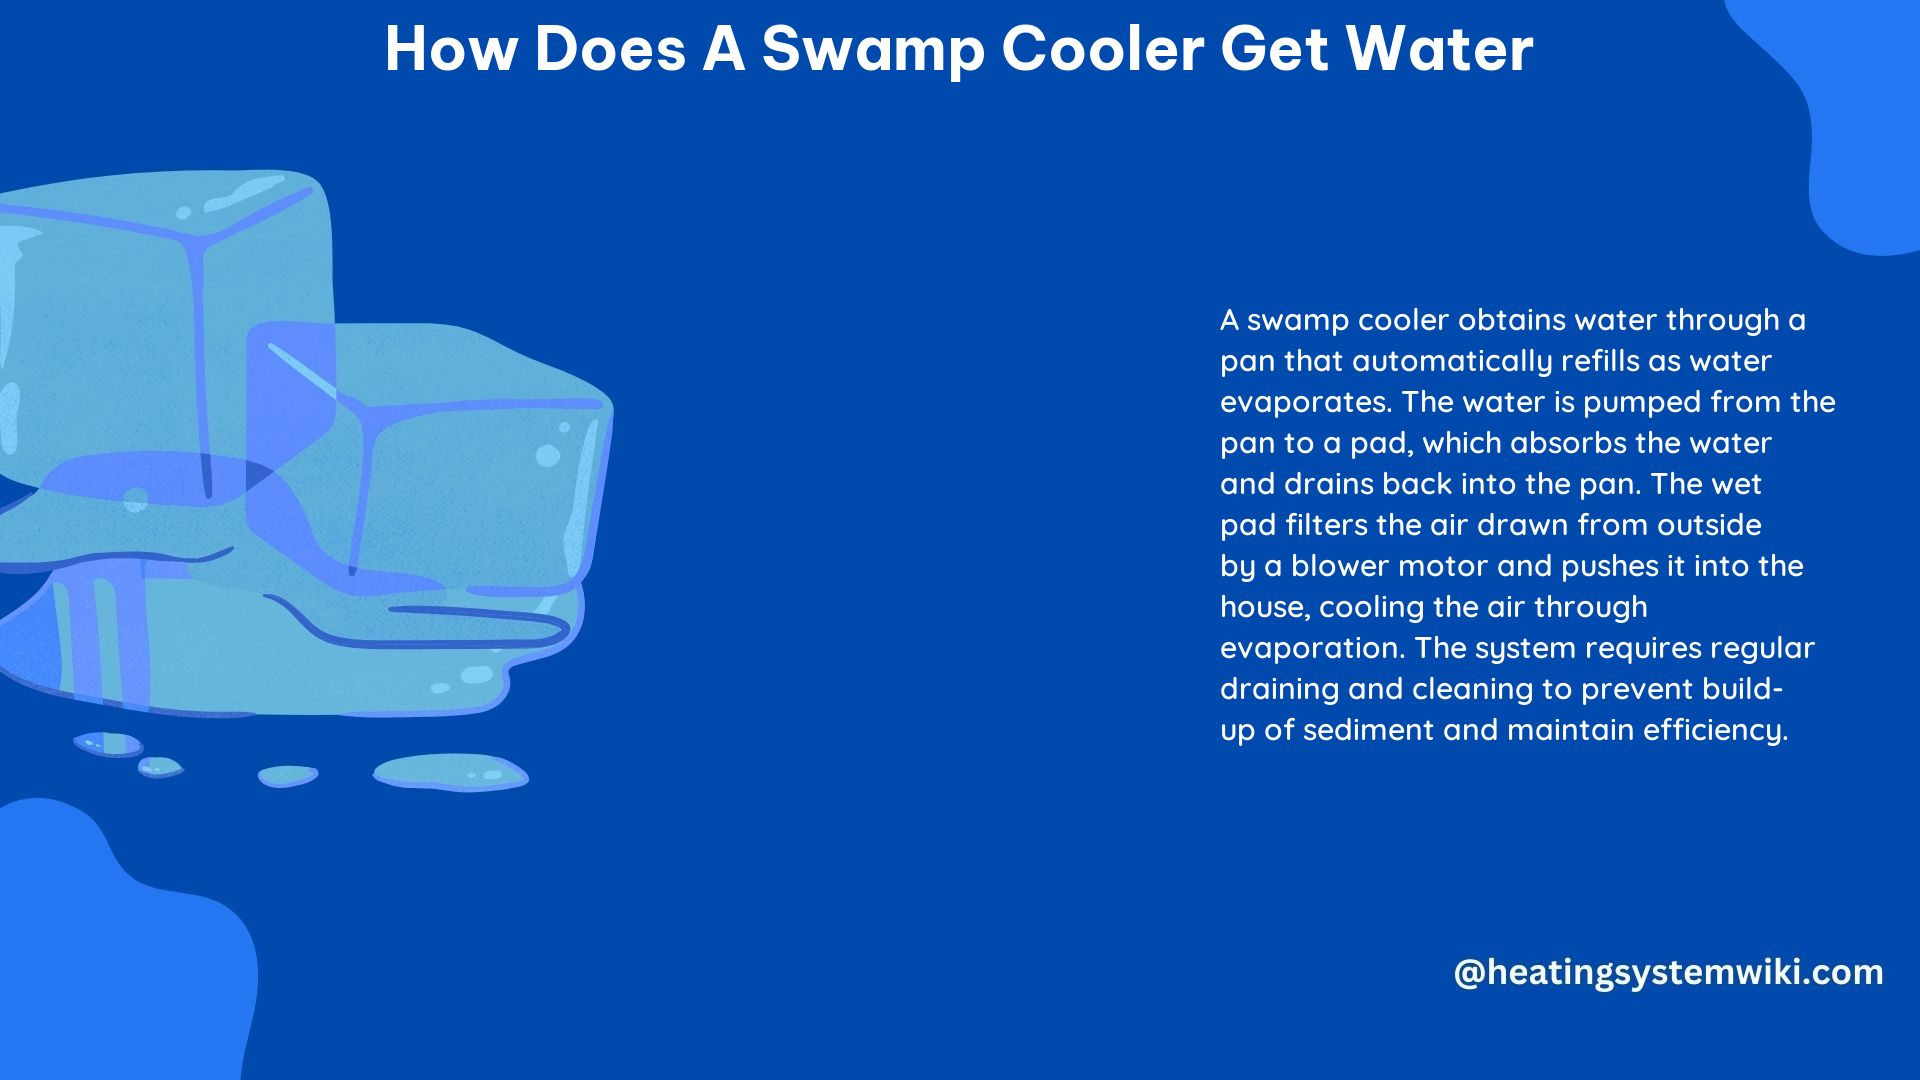 How Does a Swamp Cooler Get Water